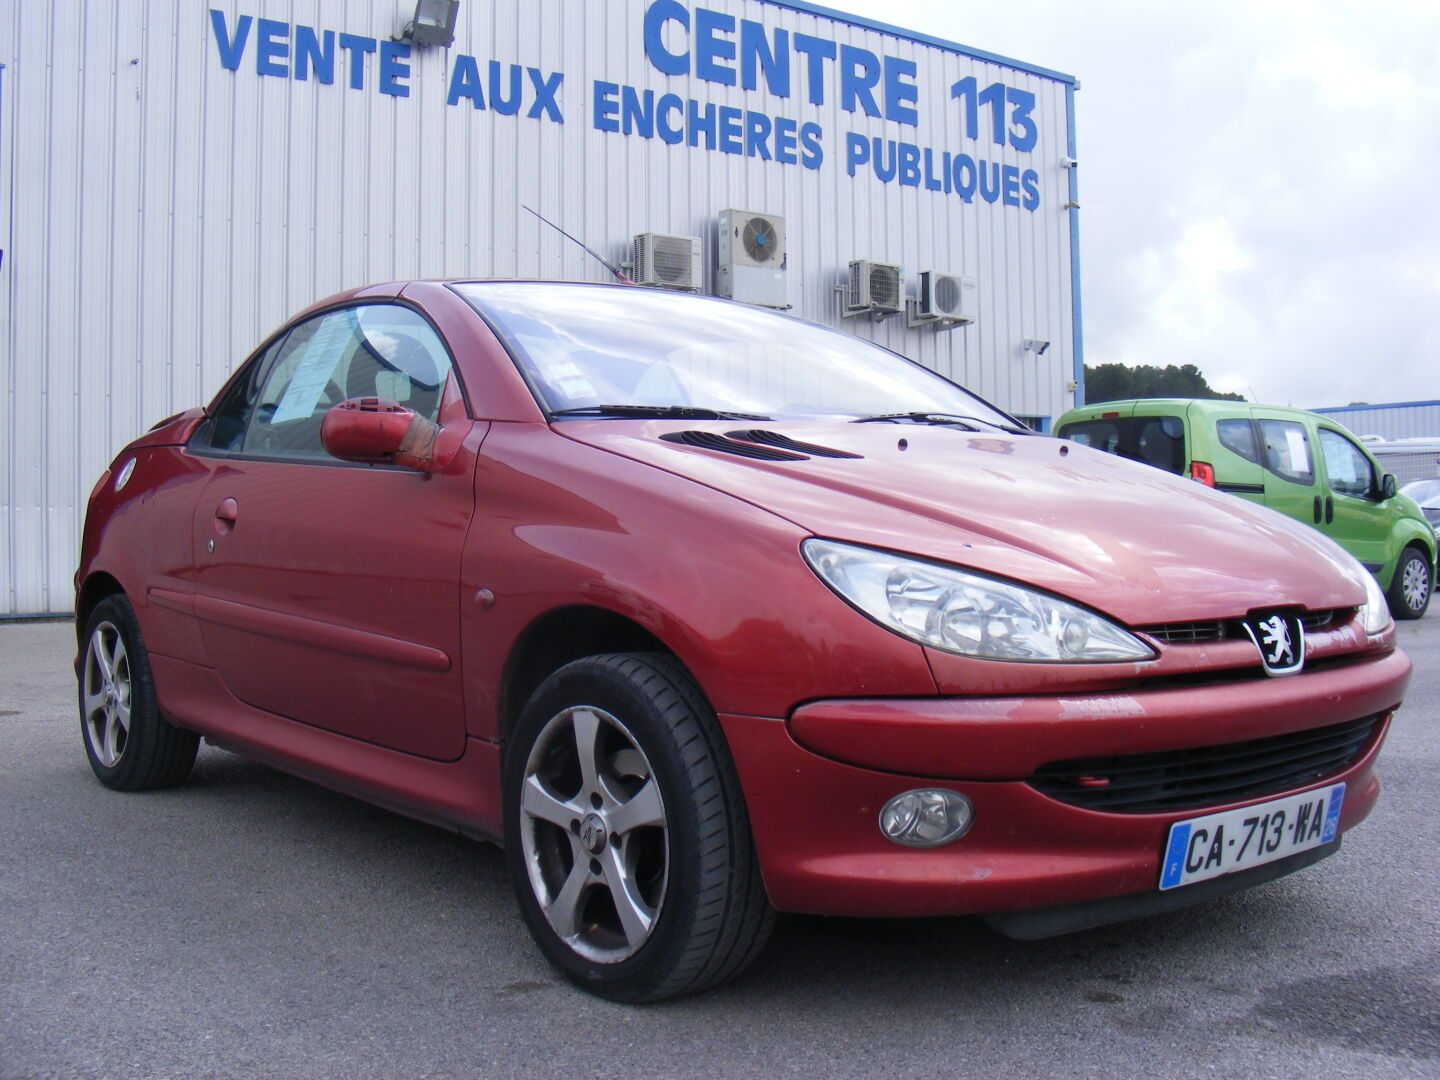 Null 206 CC 1.6 110 HP
VP PEUGEOT 206 CC 1.6 110 HP CC
Body : CABR
Serial number&hellip;